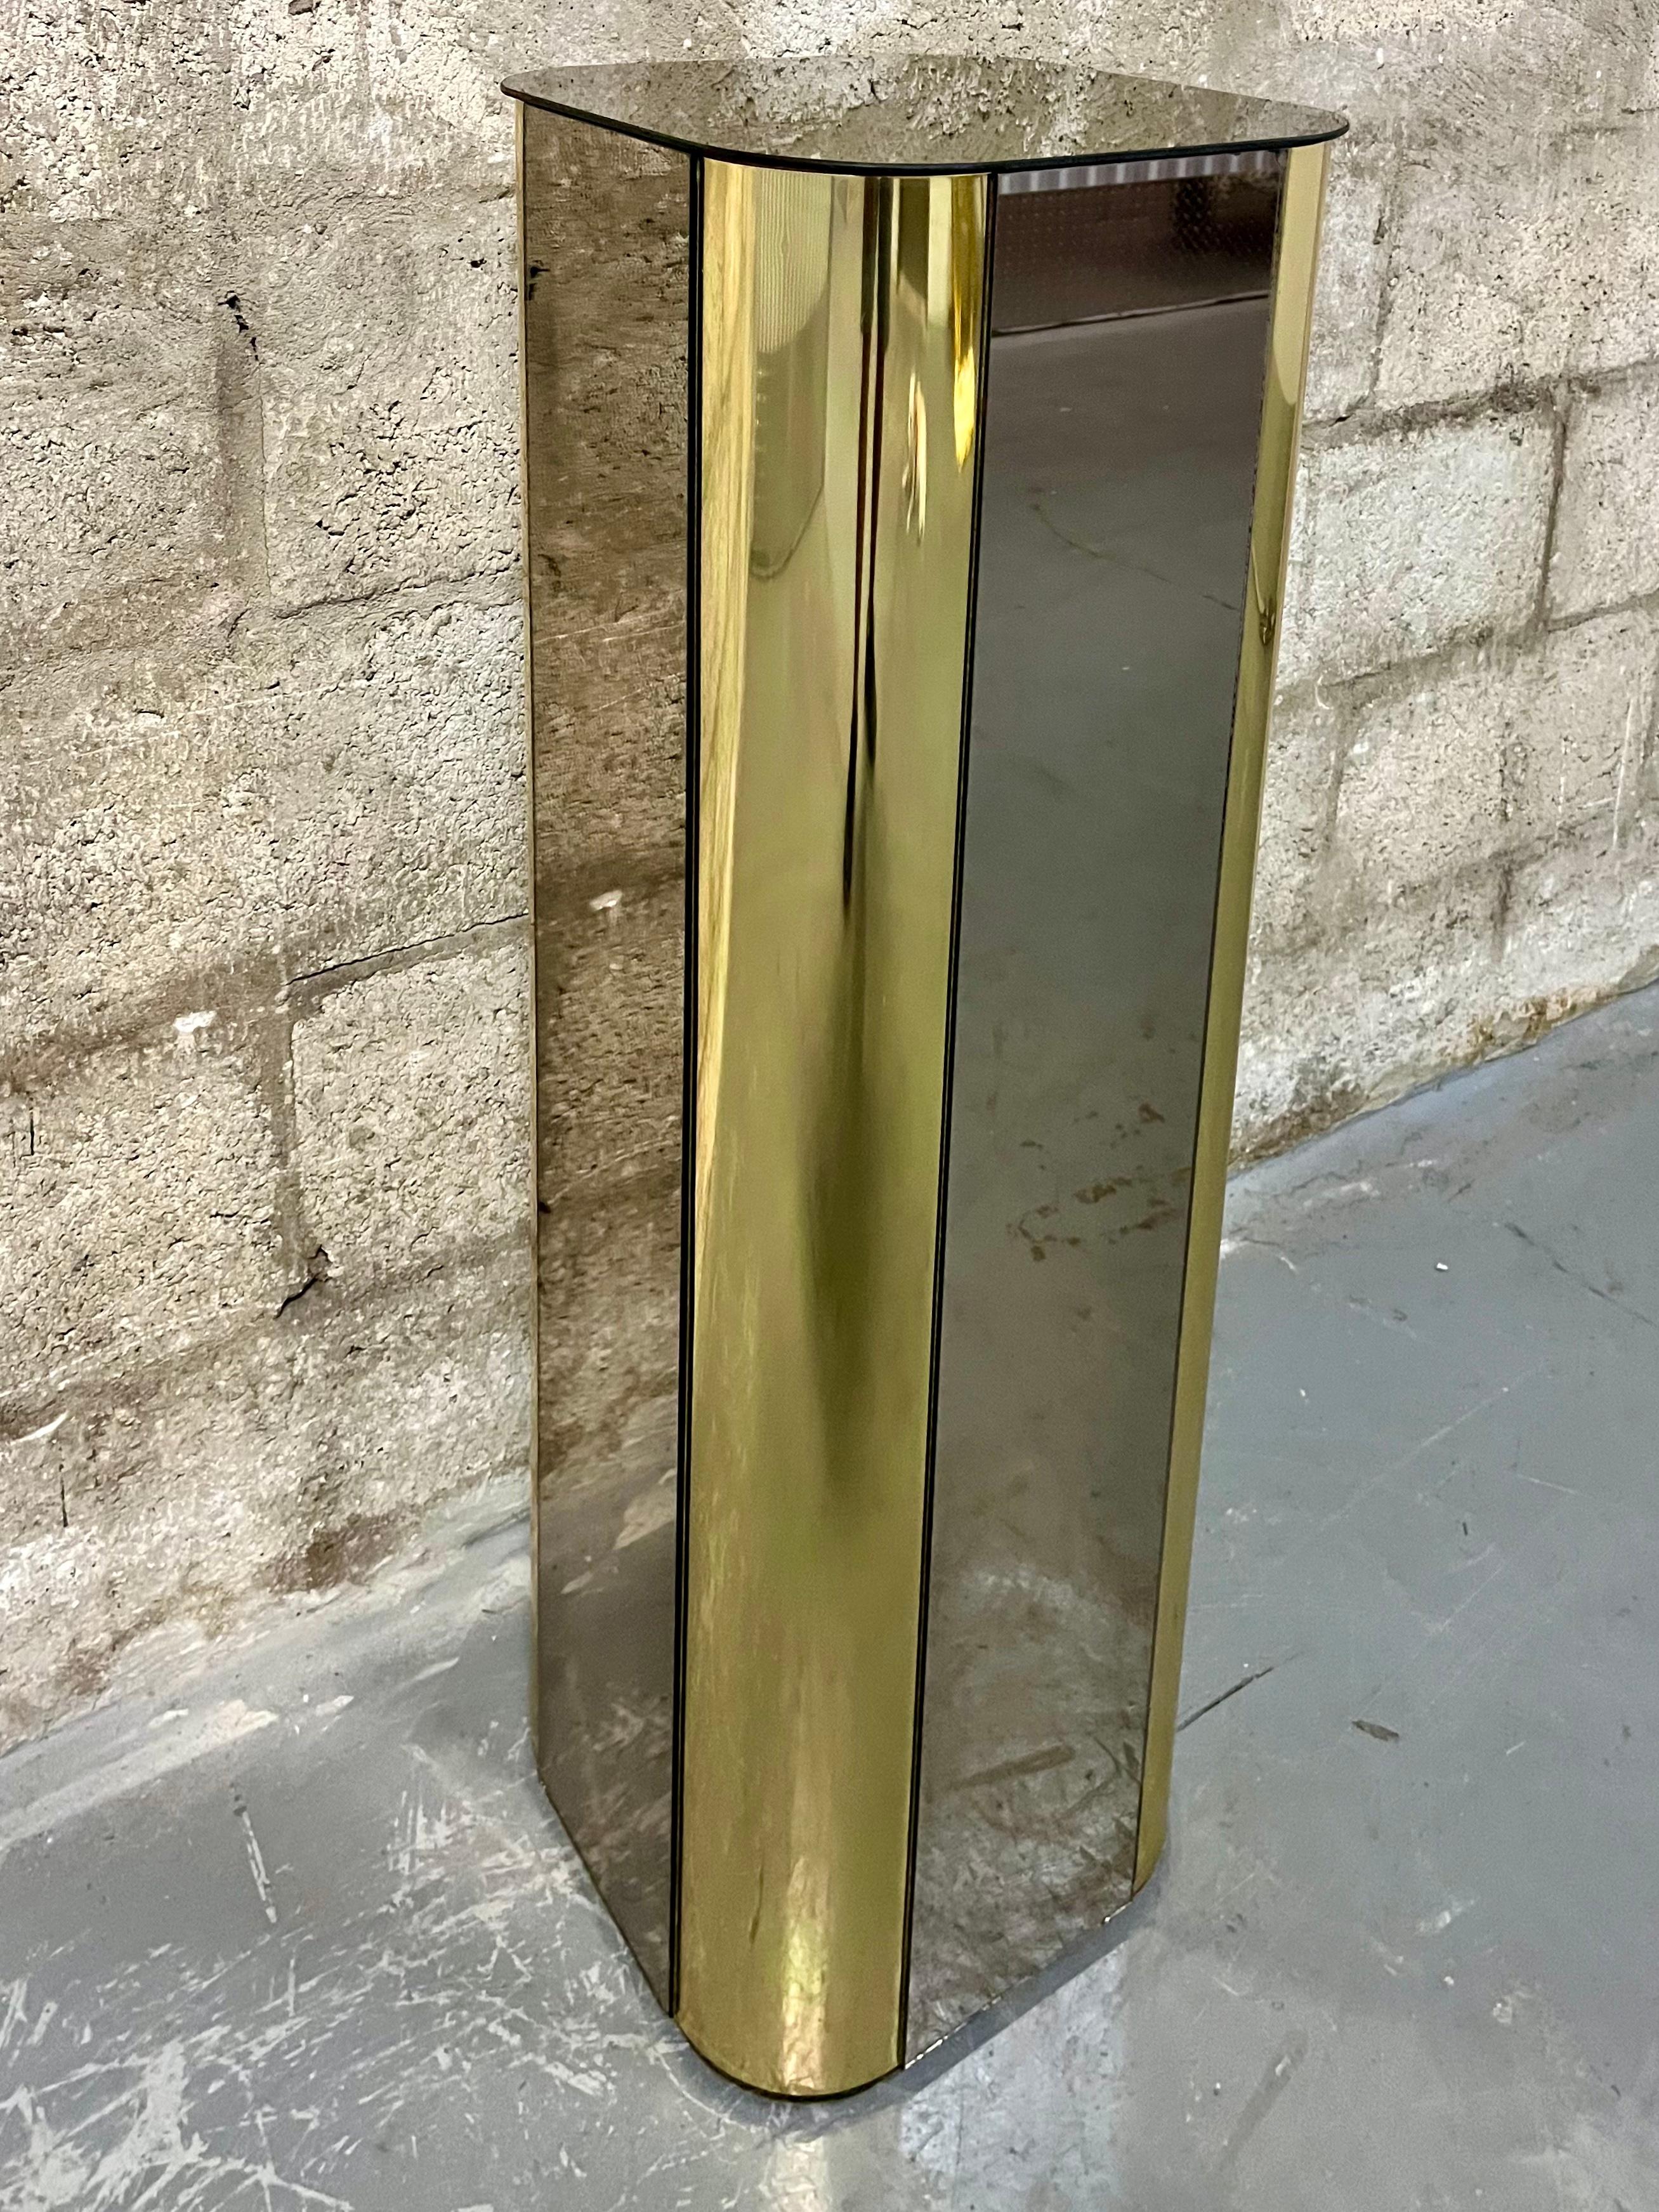 American Hollywood Regency Brass and Smoked Mirror Pedestal in the Curtis Jere's Style.